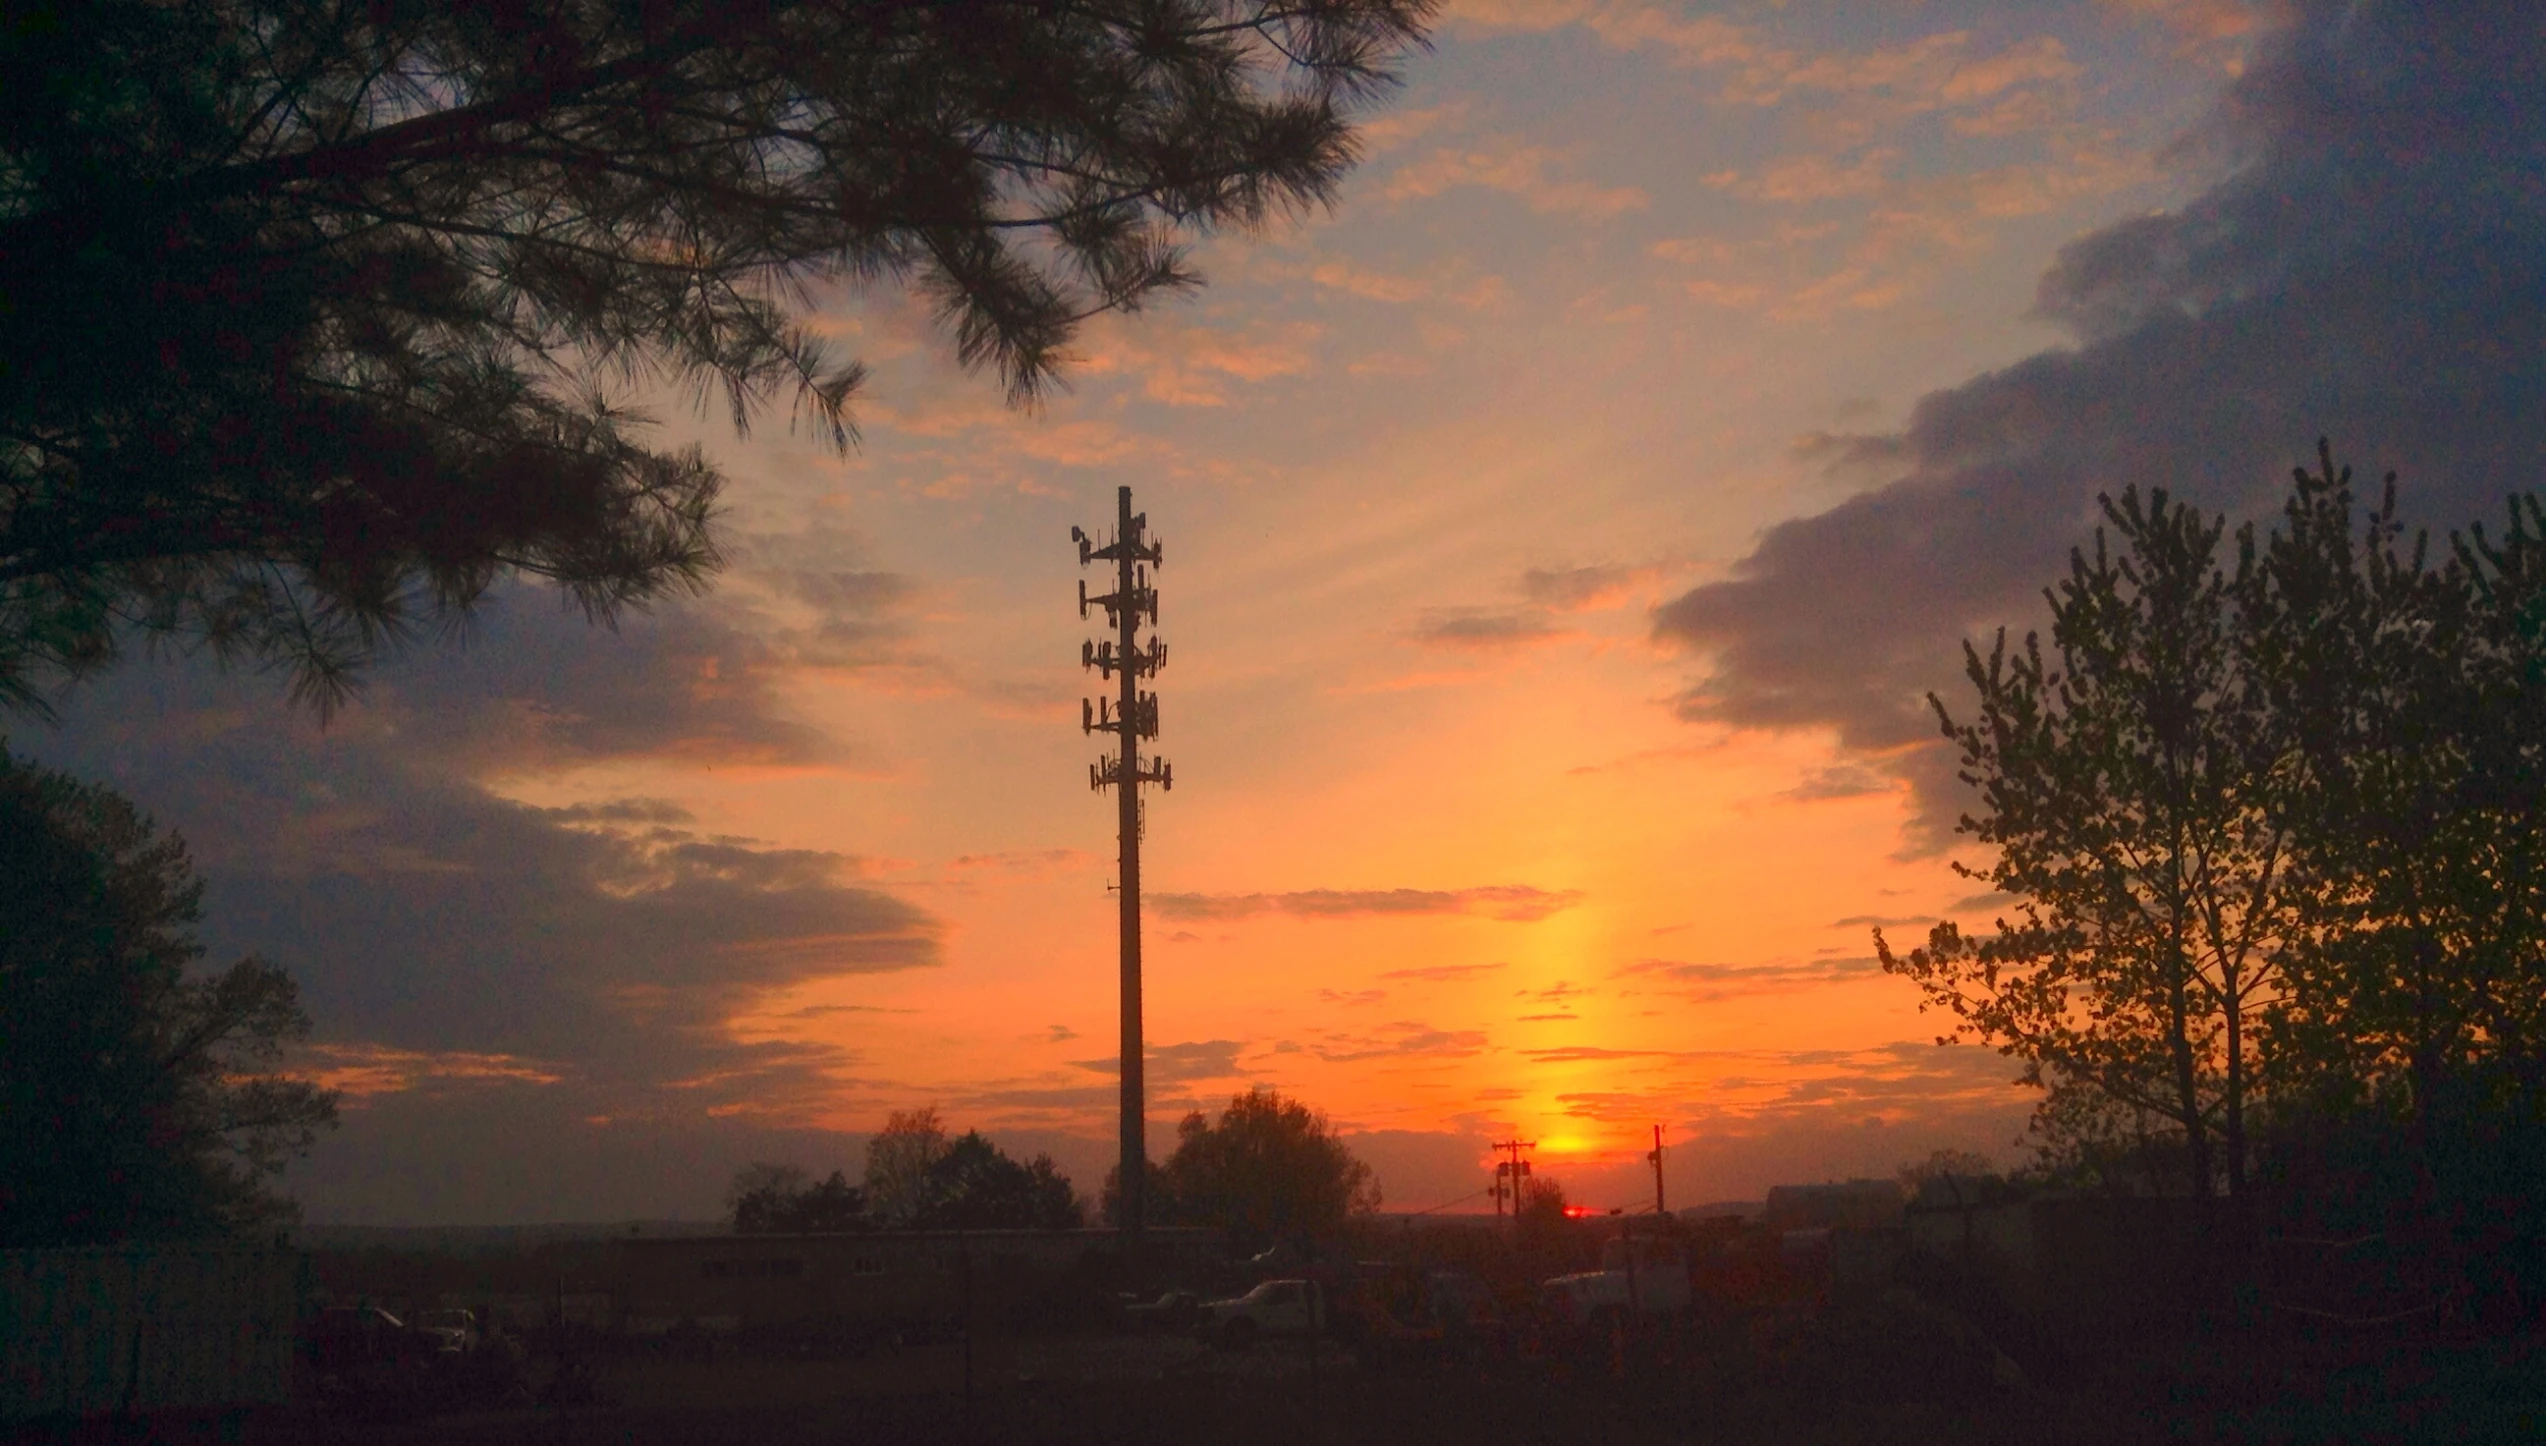 the sun is setting behind the cell towers